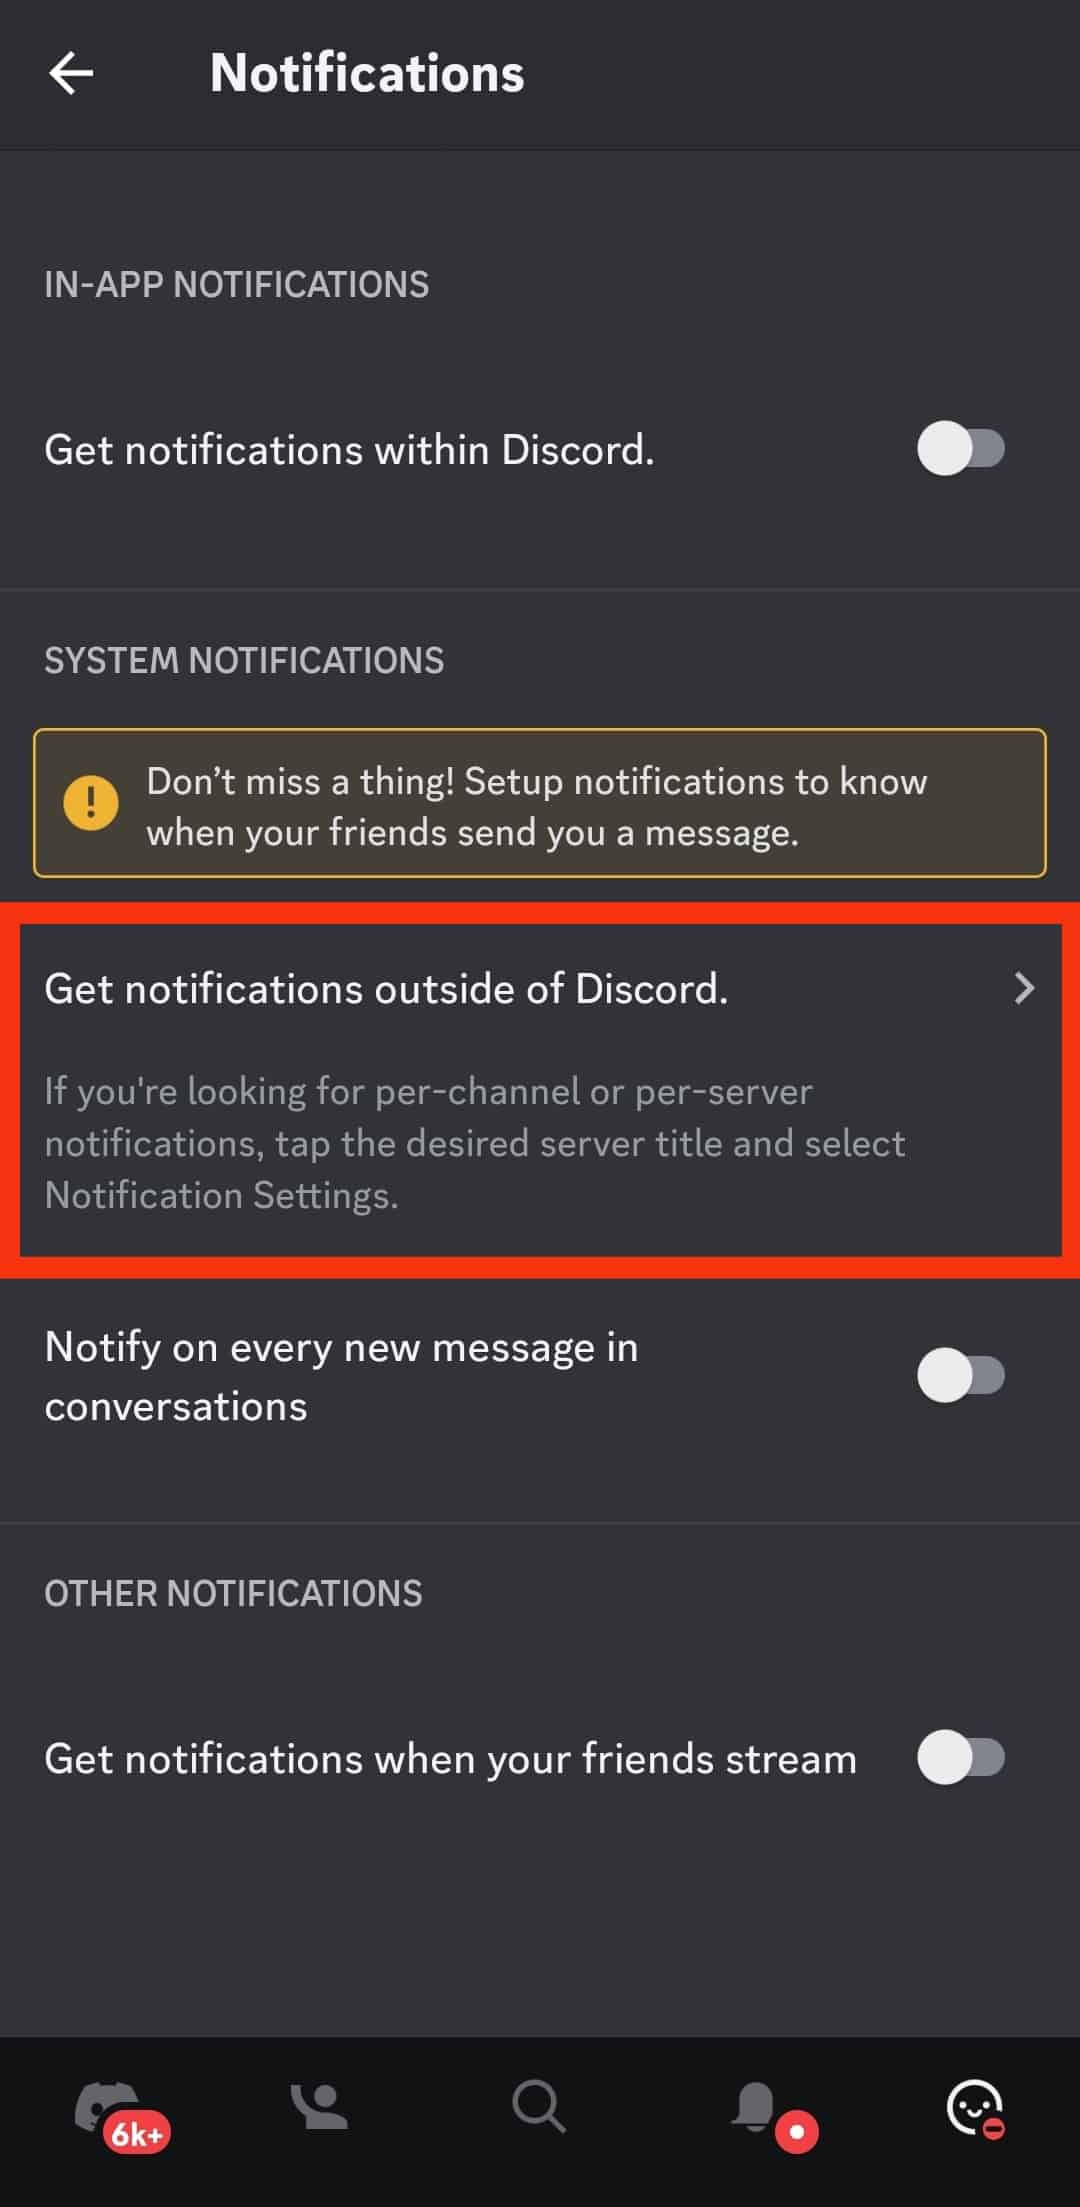 Press The Get Notifications Outside Of Discord Option